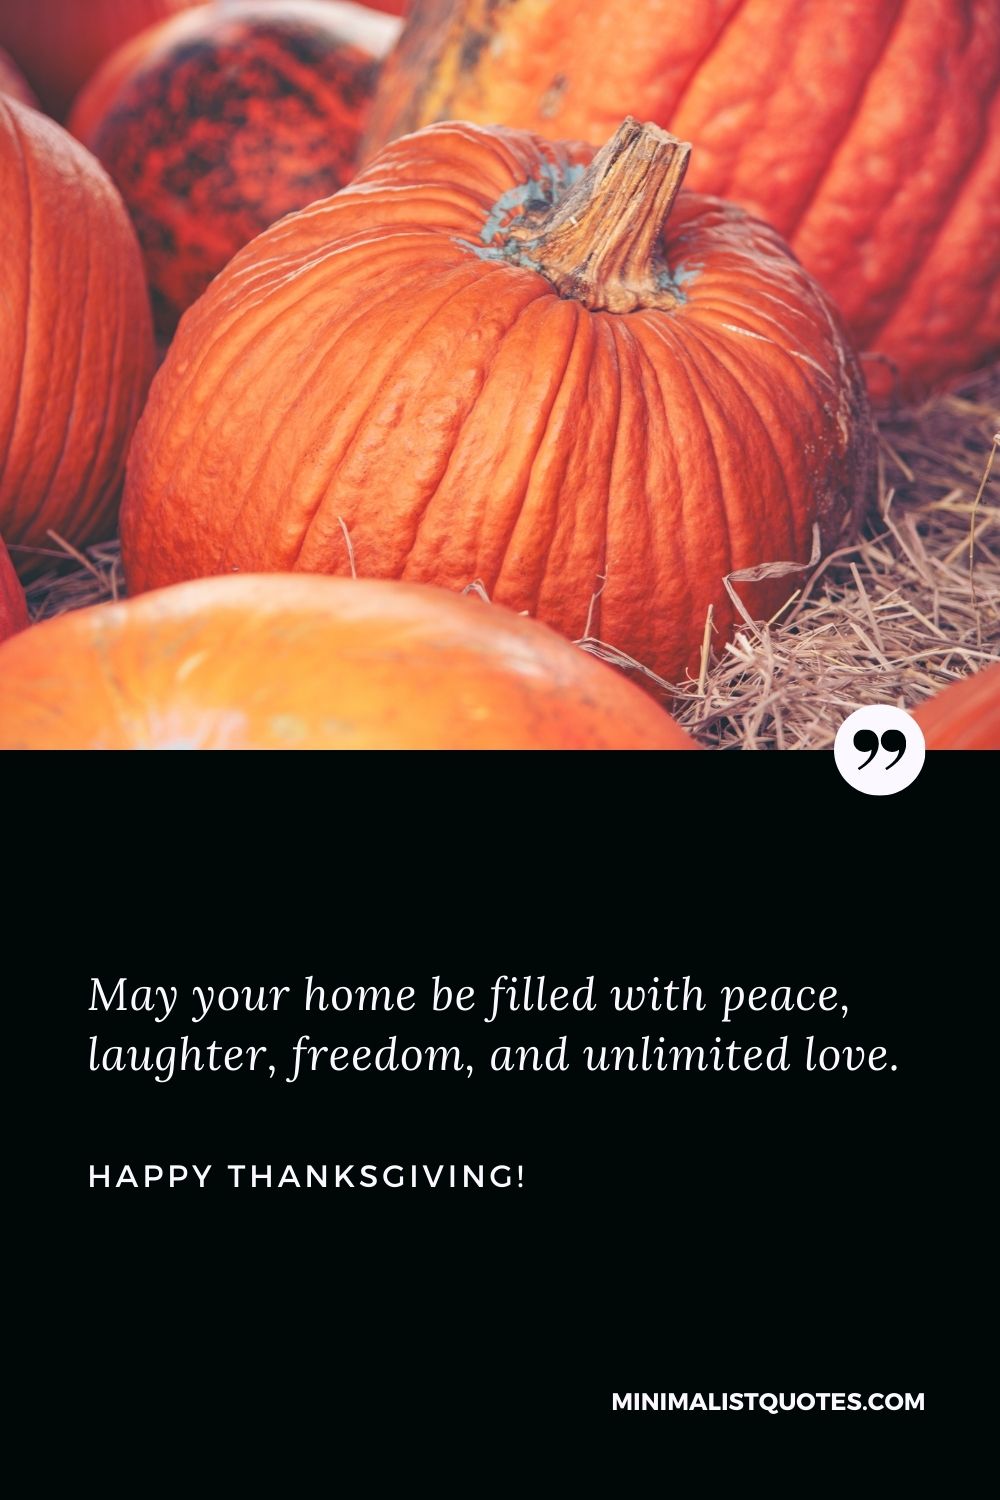 Happy Thanksgiving family and friends: May your home be filled with peace, laughter, freedom, and unlimited love. Happy Thanksgiving!